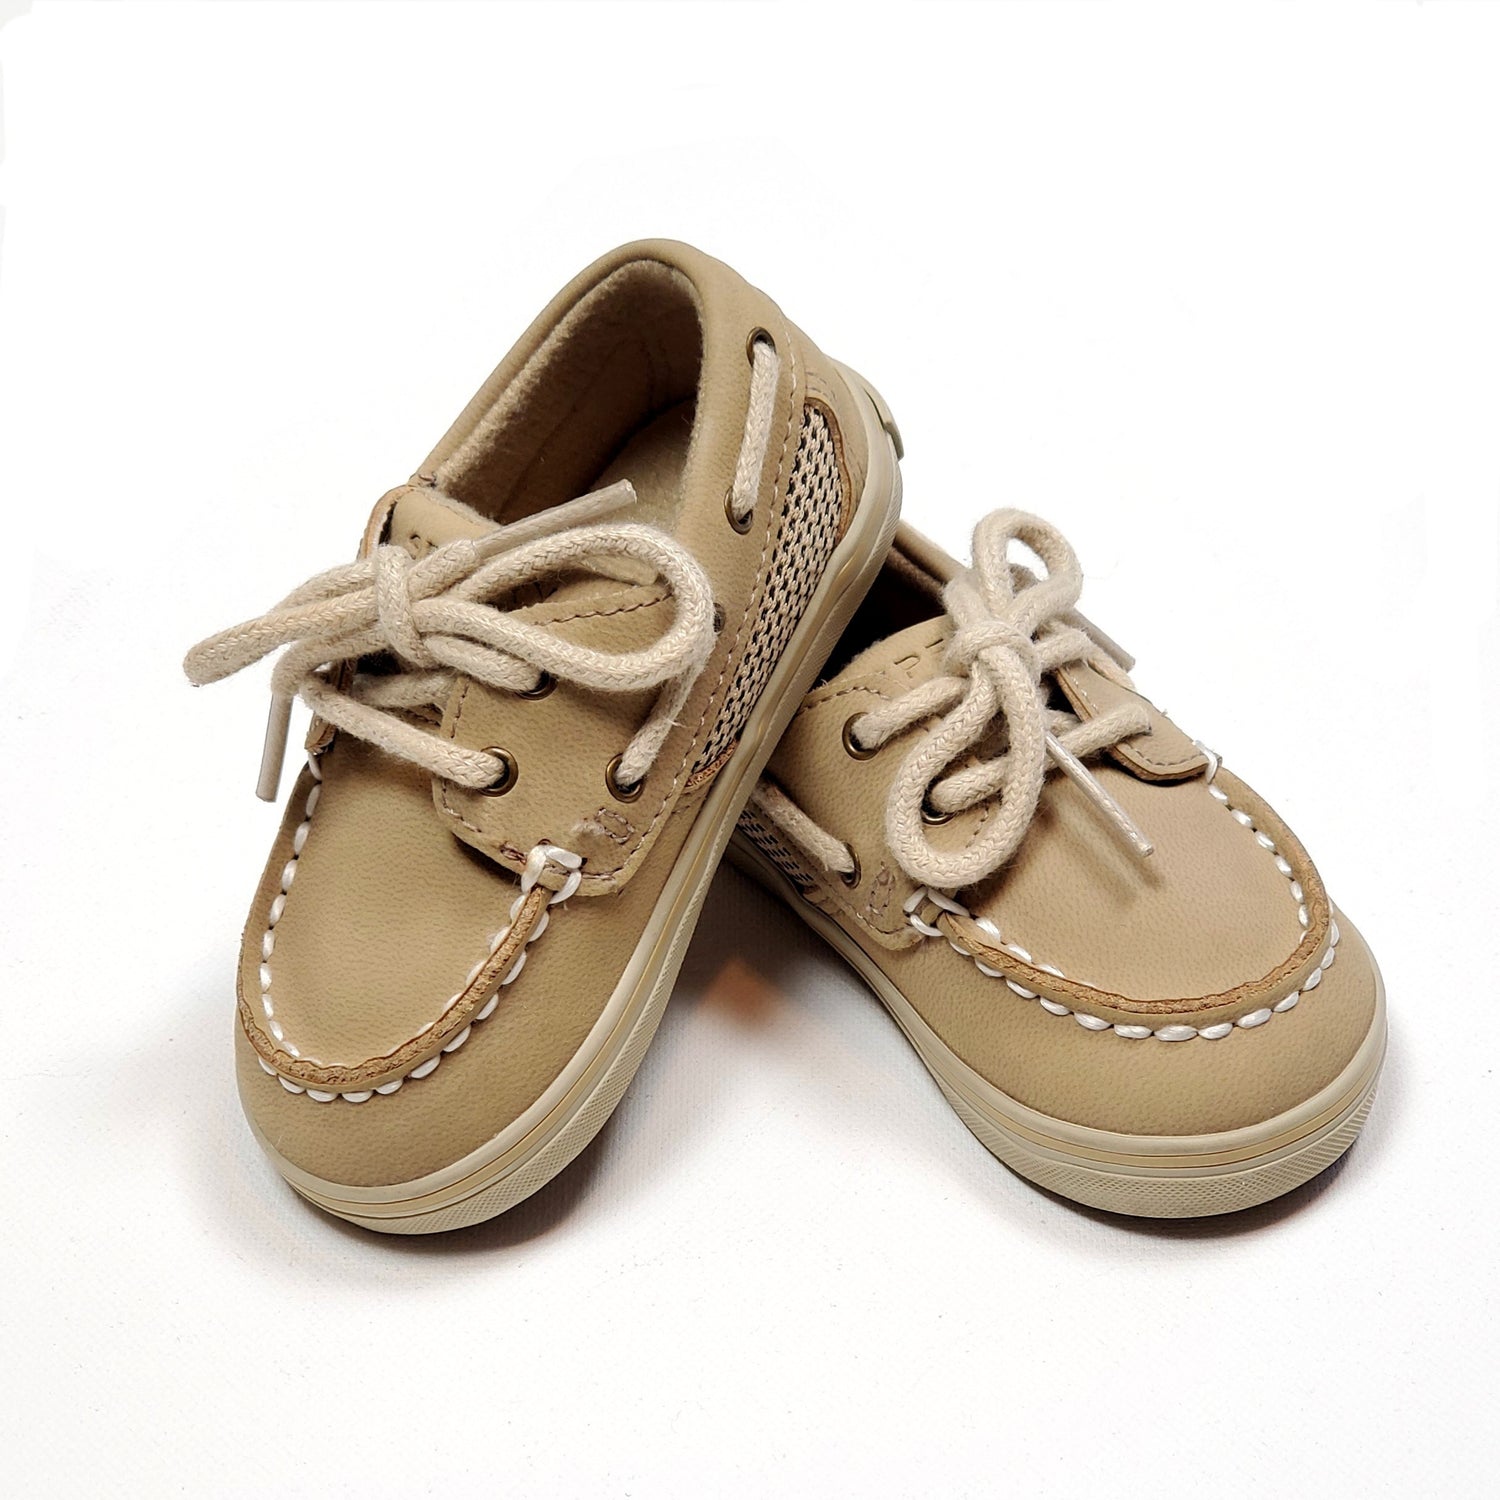 Baby Boy Shoes New and Used 